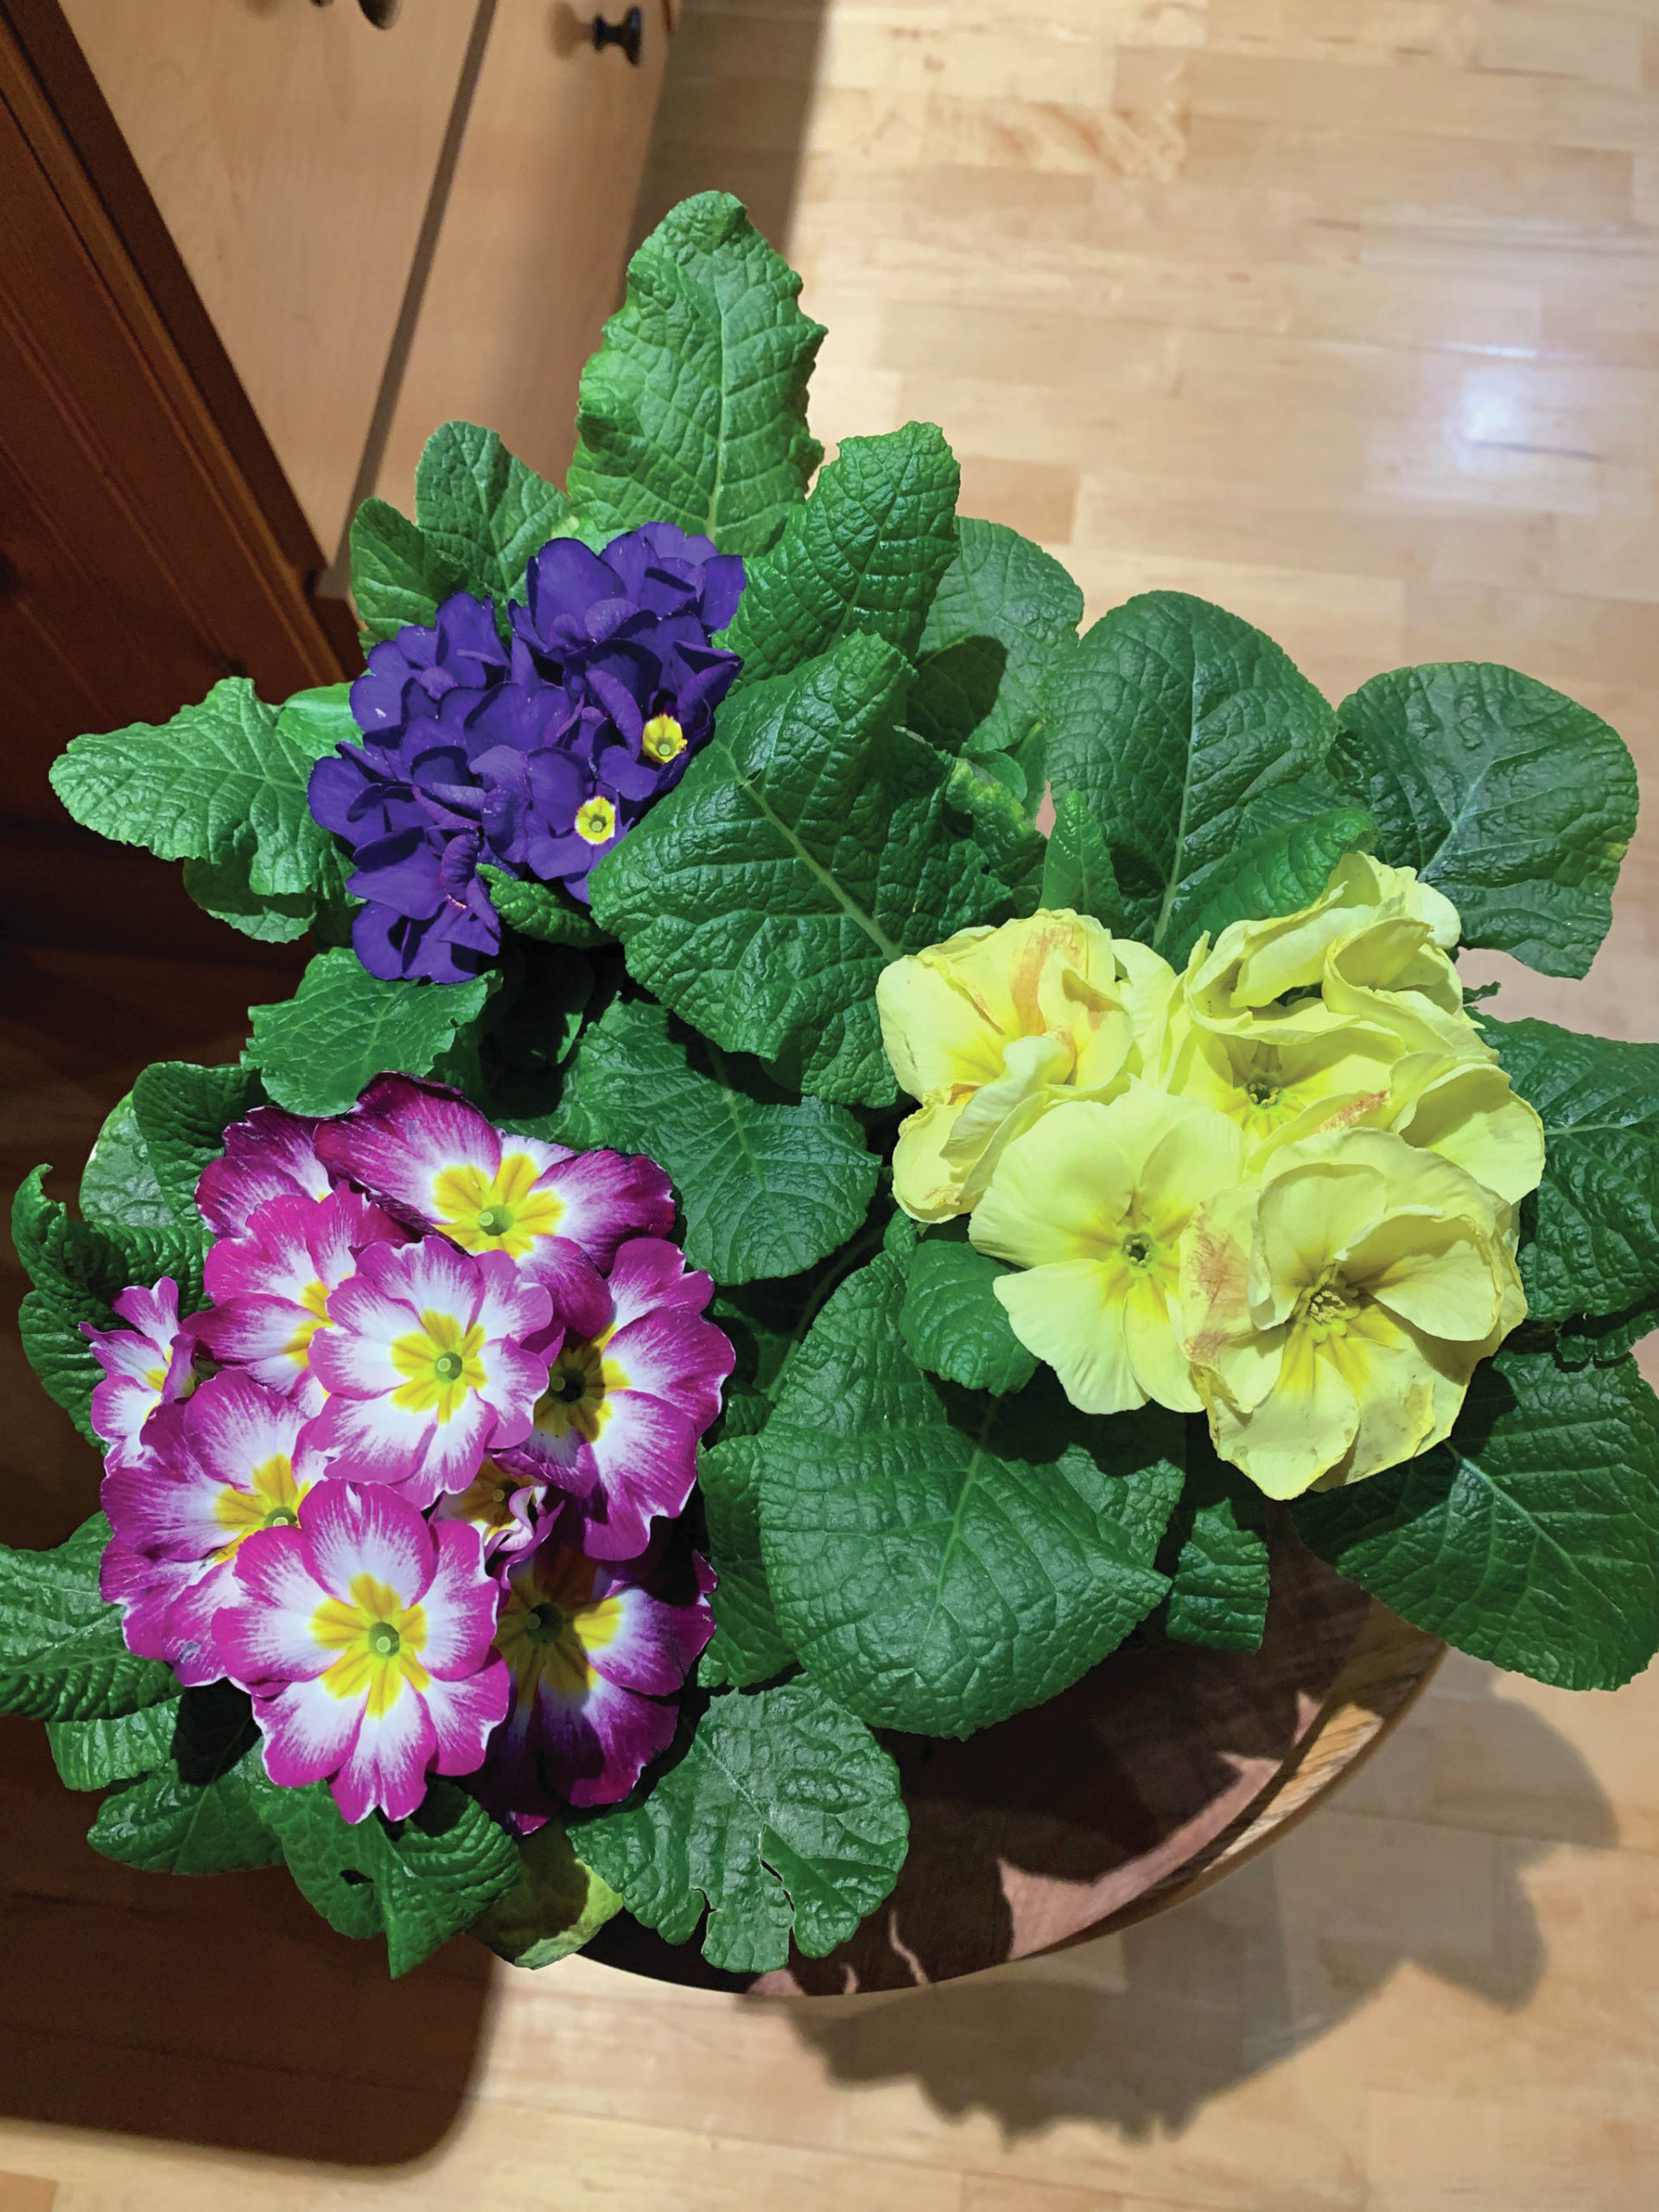 “These primulas were not to be resisted,” the Kachemak Gardener says of these flowers blooming in her Homer, Alaska, home on Tuesday, Feb. 2, 2021. “They will enhance the dining room table and then, come spring, find a home in the East Garden.” (Photo by Rosemary Fitzpatrick)